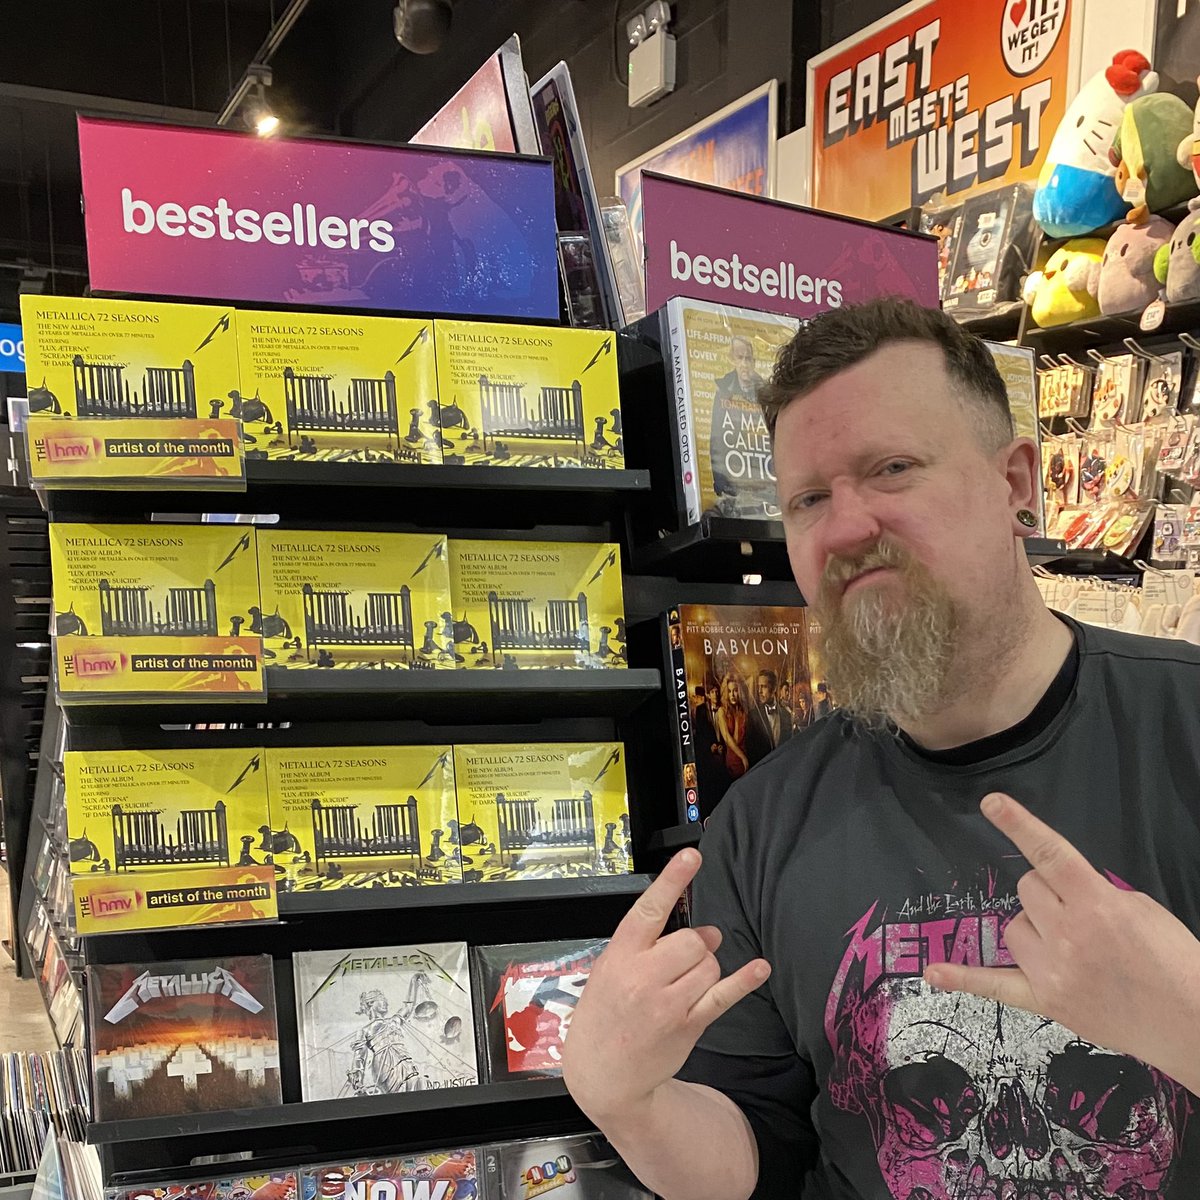 The brand new #metallica album #72seasons is out today. 

They are also the #hmvArtistOfTheMonth so check out their back catalog of albums while you are in store. 

#hmv #hmvforthefans #fyp #fypシ #newrelease  #newmusic #newmusicfriday #newreleasefriday